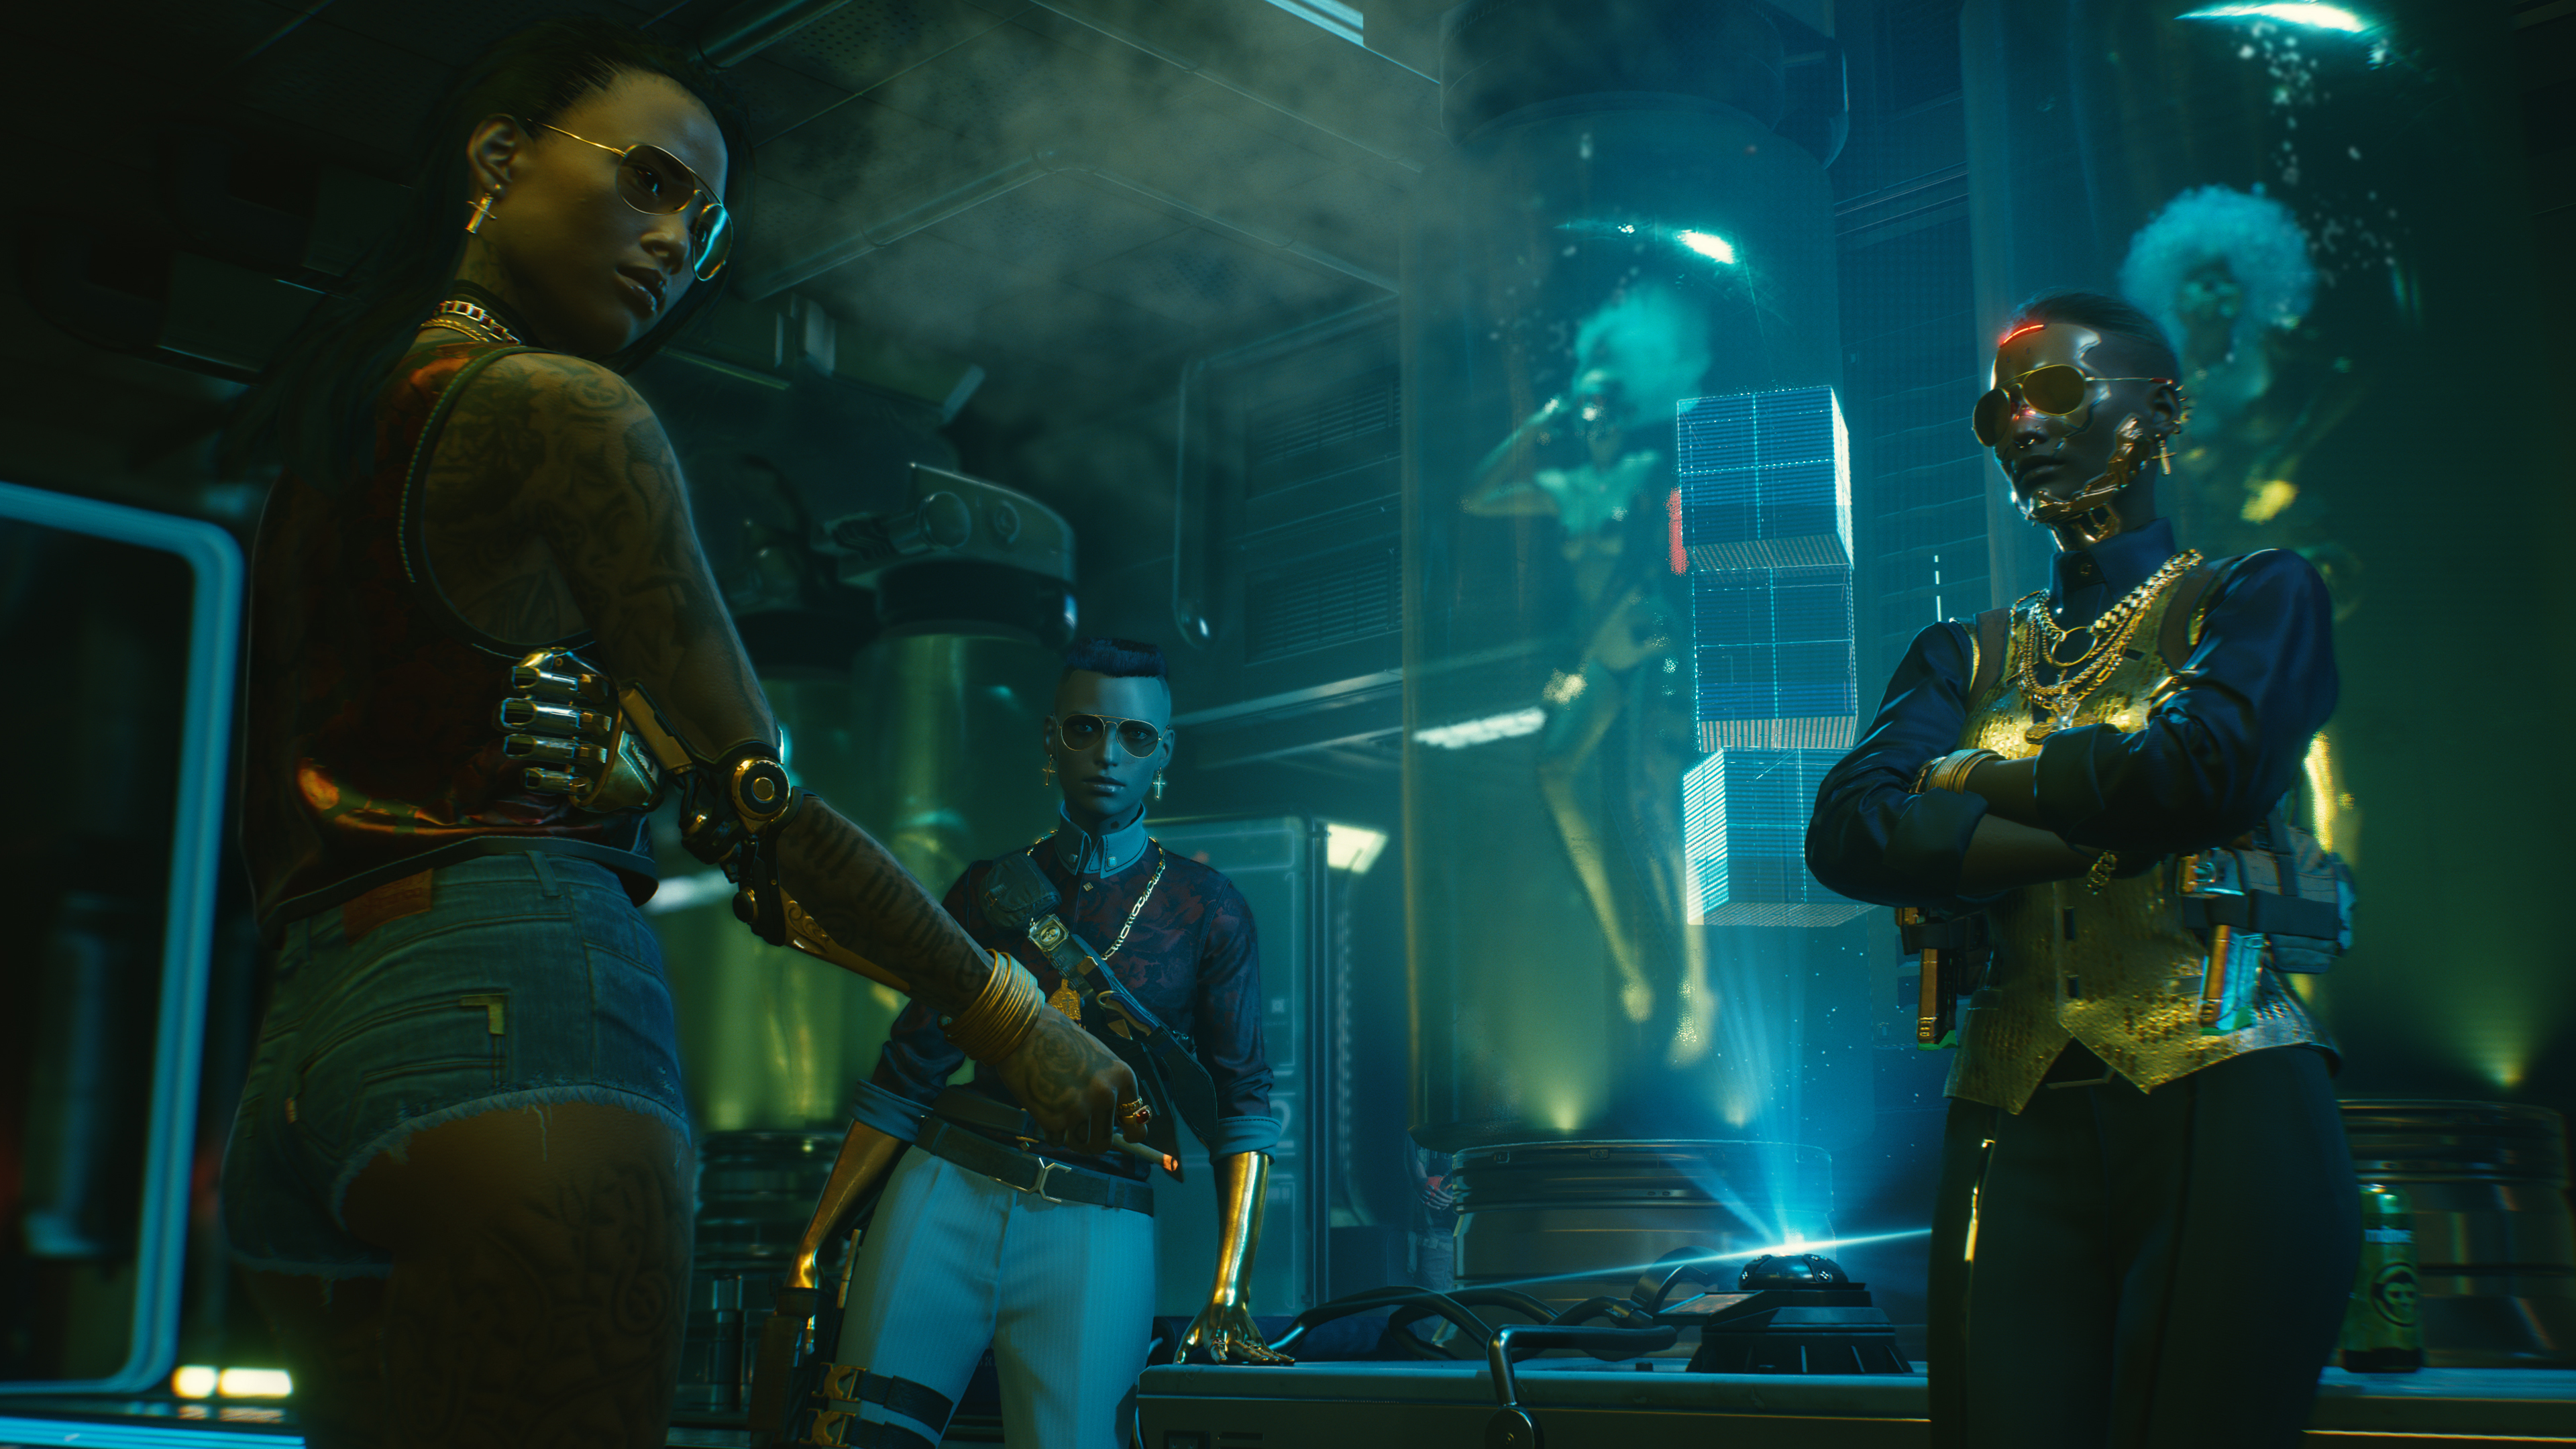 Image for "There is always a way to go without killing anyone" in Cyberpunk 2077